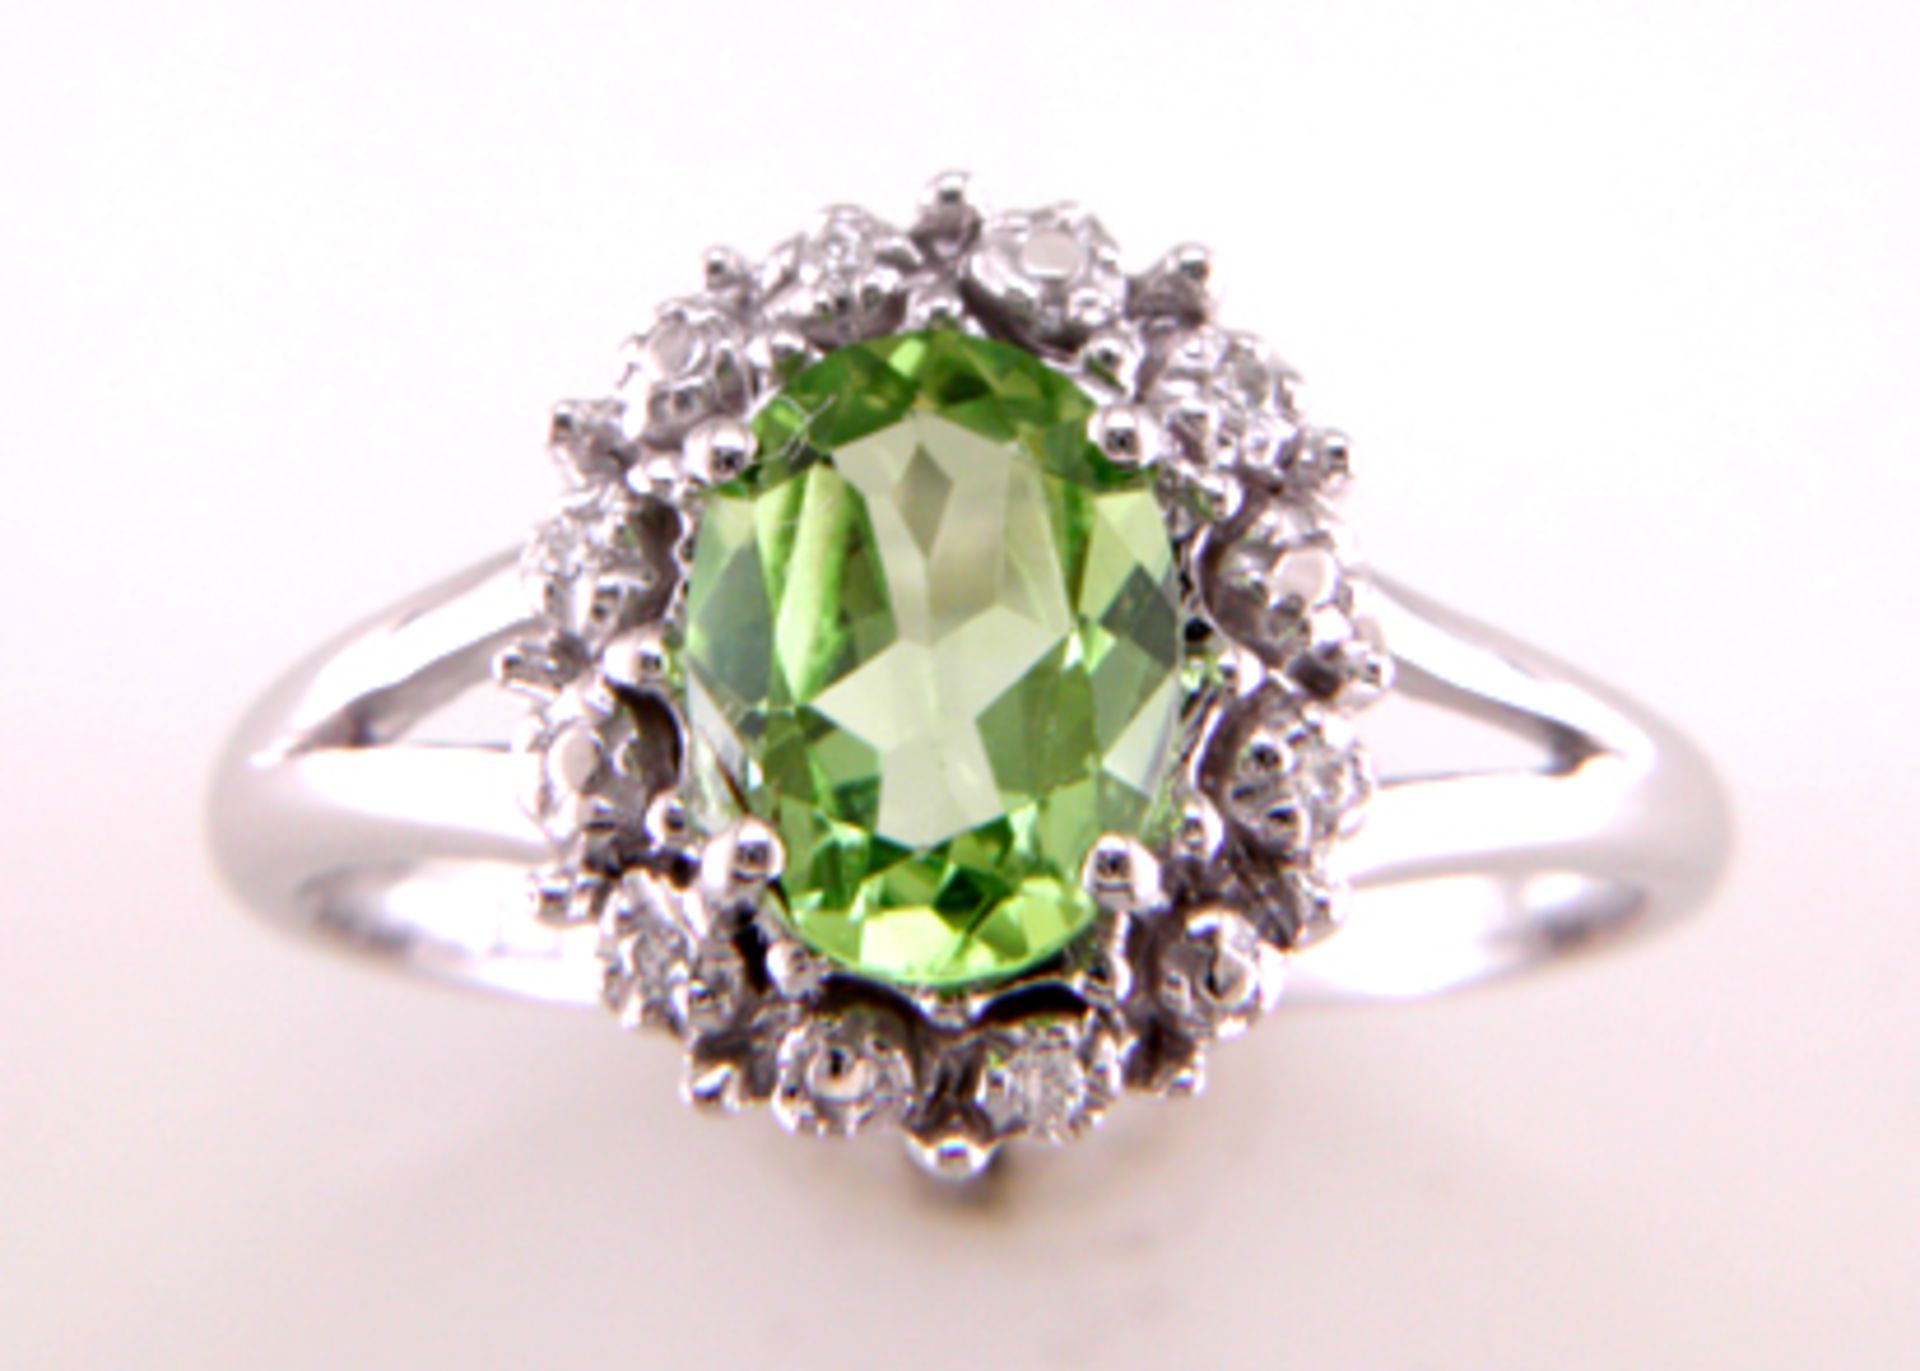 9ct White Gold Cluster Diamond And Peridot Ring (P1.40) 0.09 Carats - Valued by GIE £1,420.00 - - Image 5 of 7